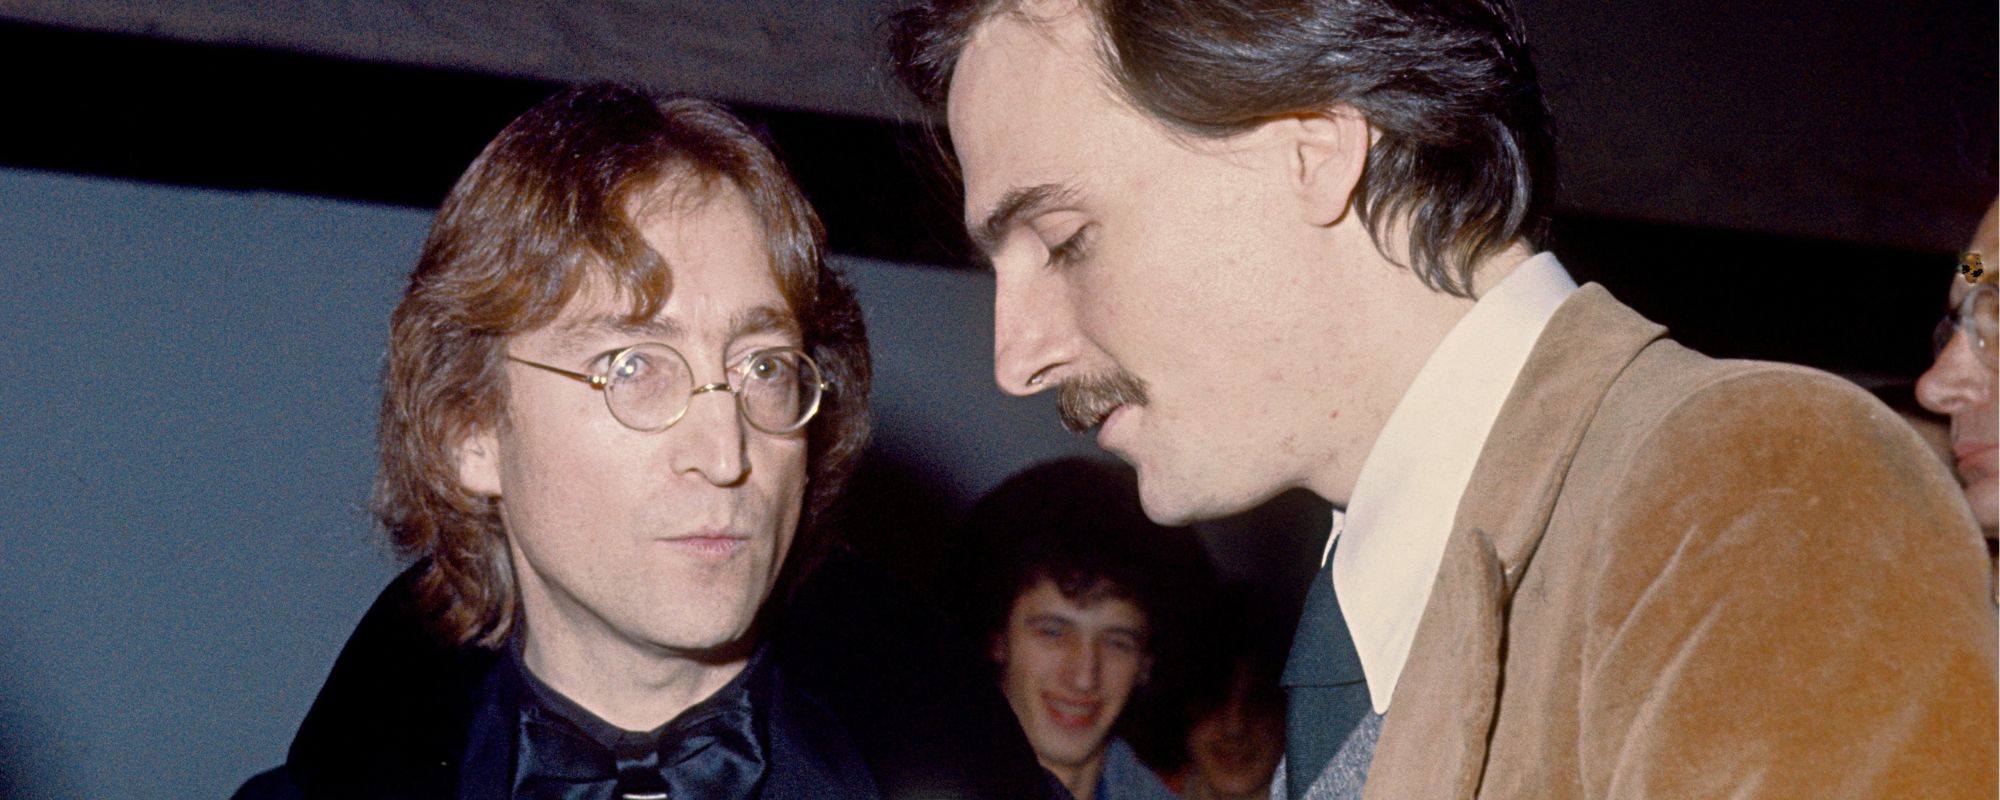 John Lennon and James Taylor speaking to one another